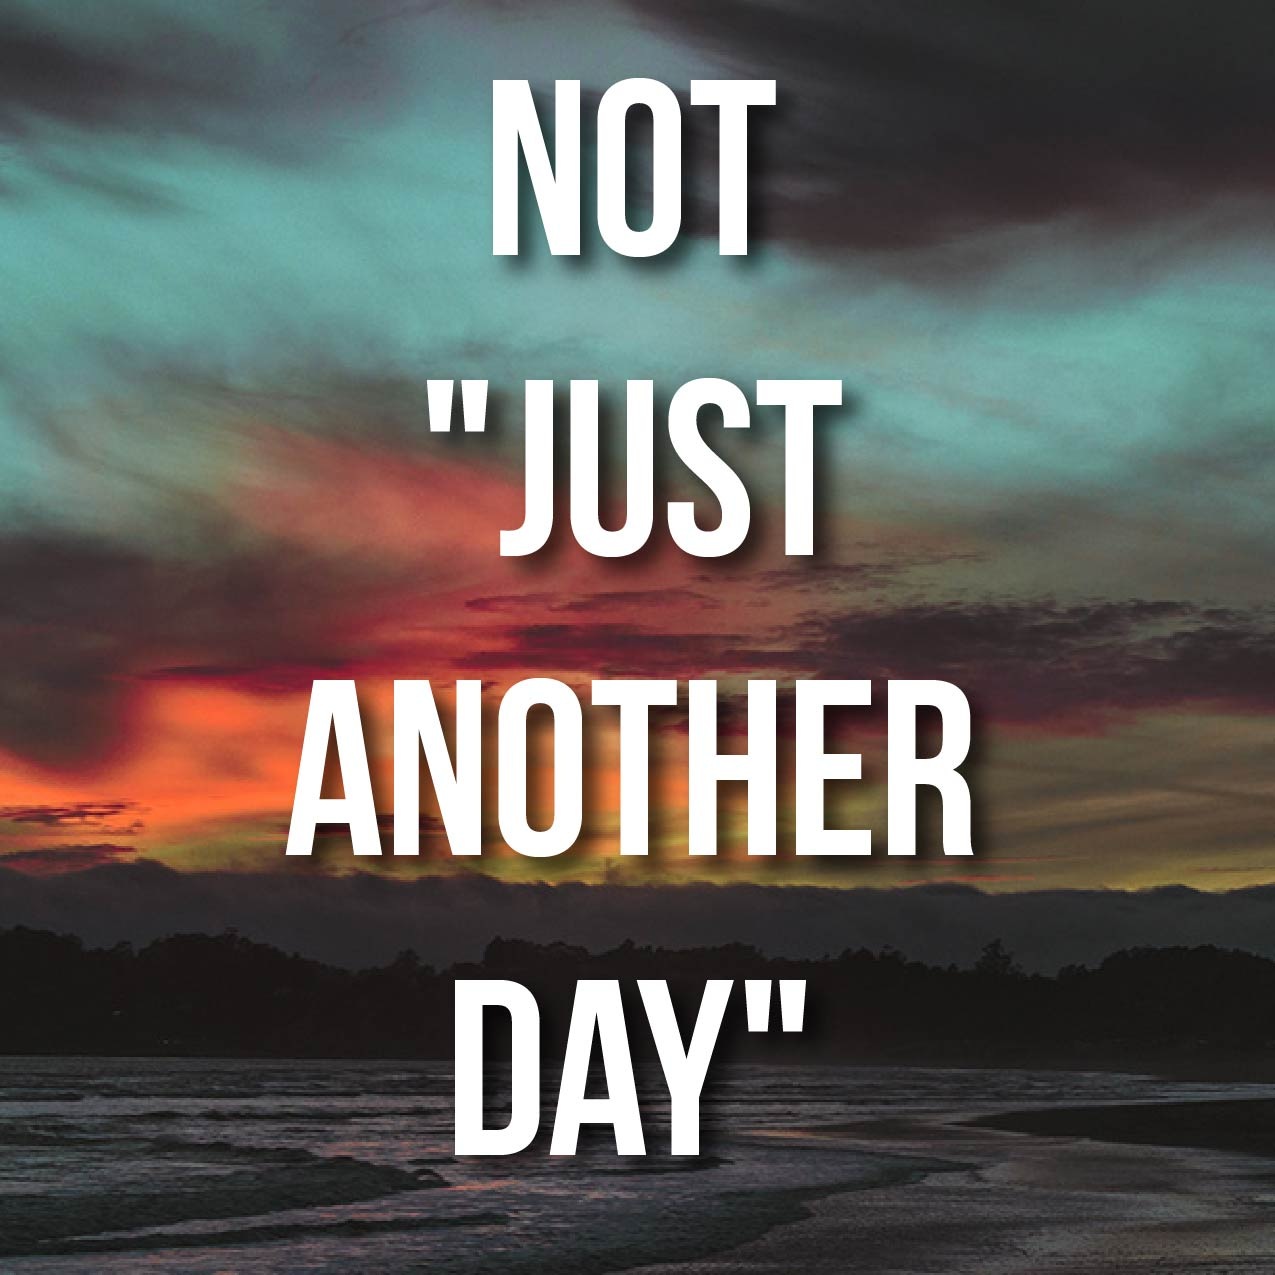 Not “Just Another Day”